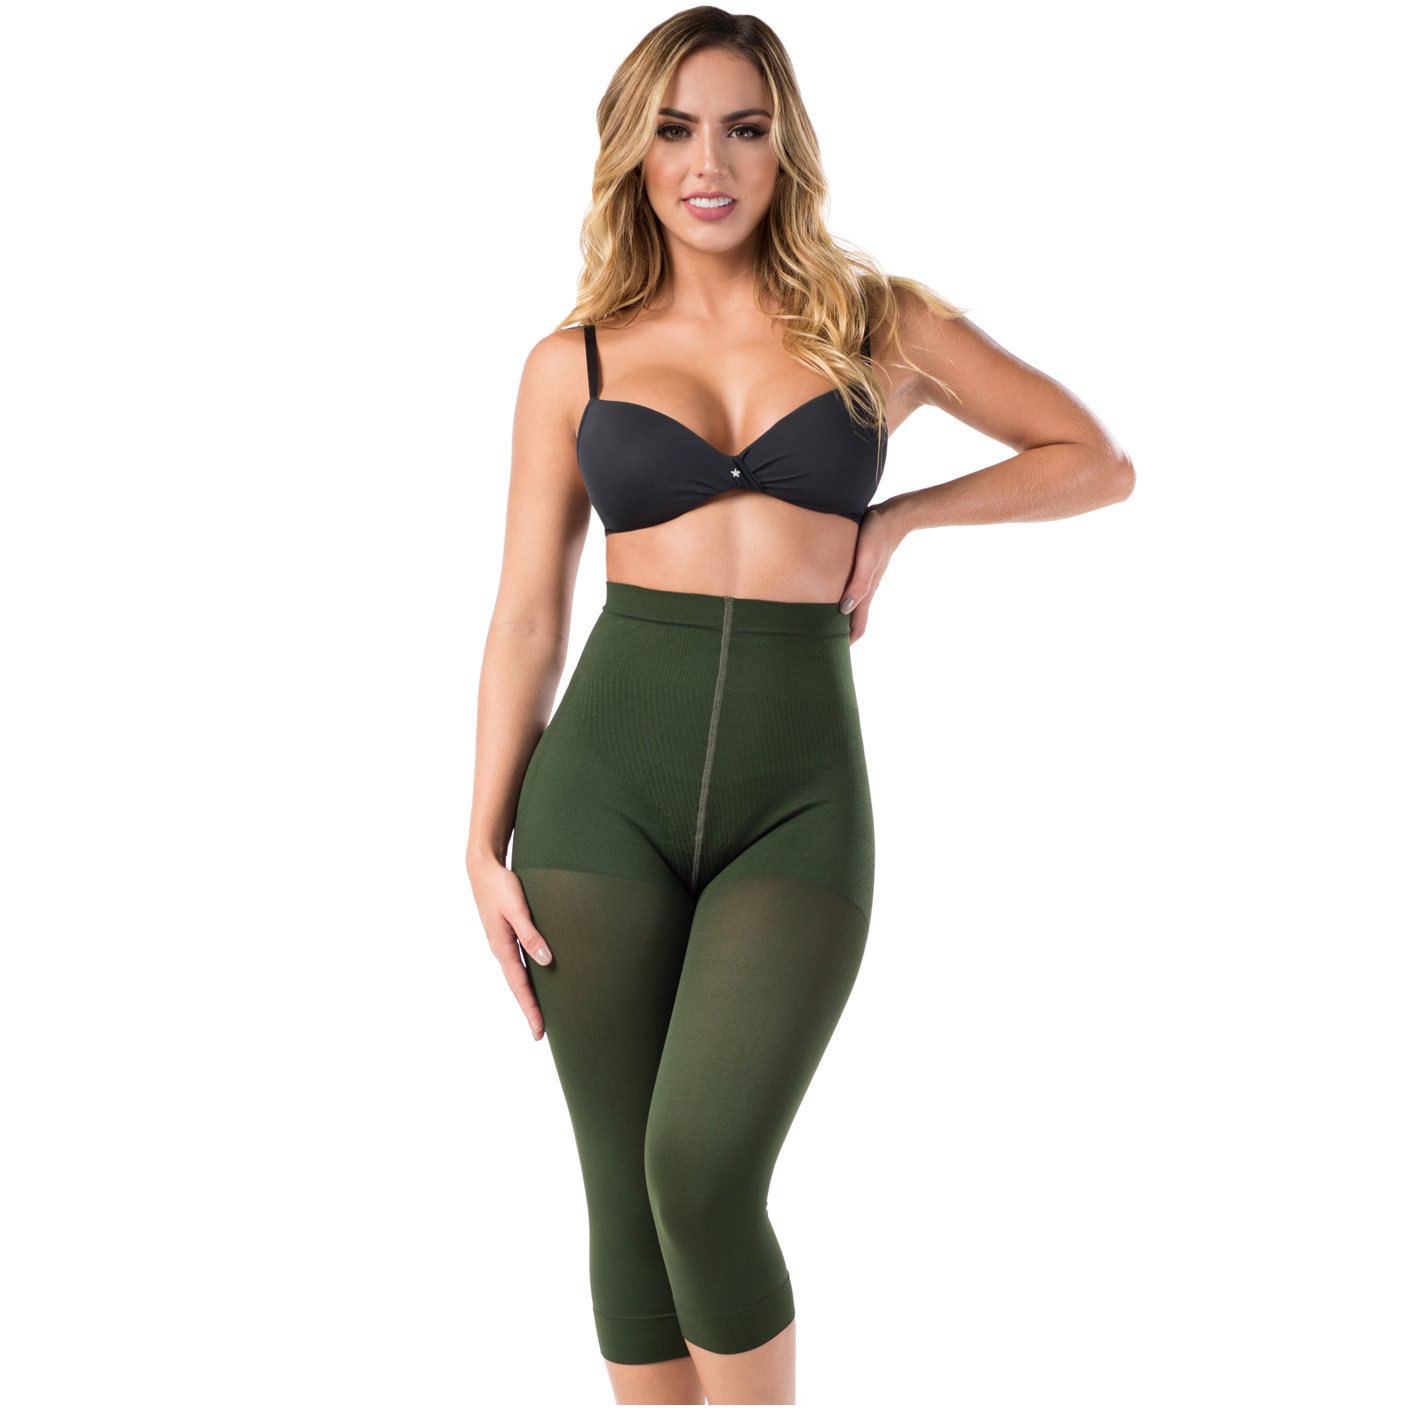 Laty Rose: 21840 - Colombian High Waist Tummy Control Leggings - Showmee  Store